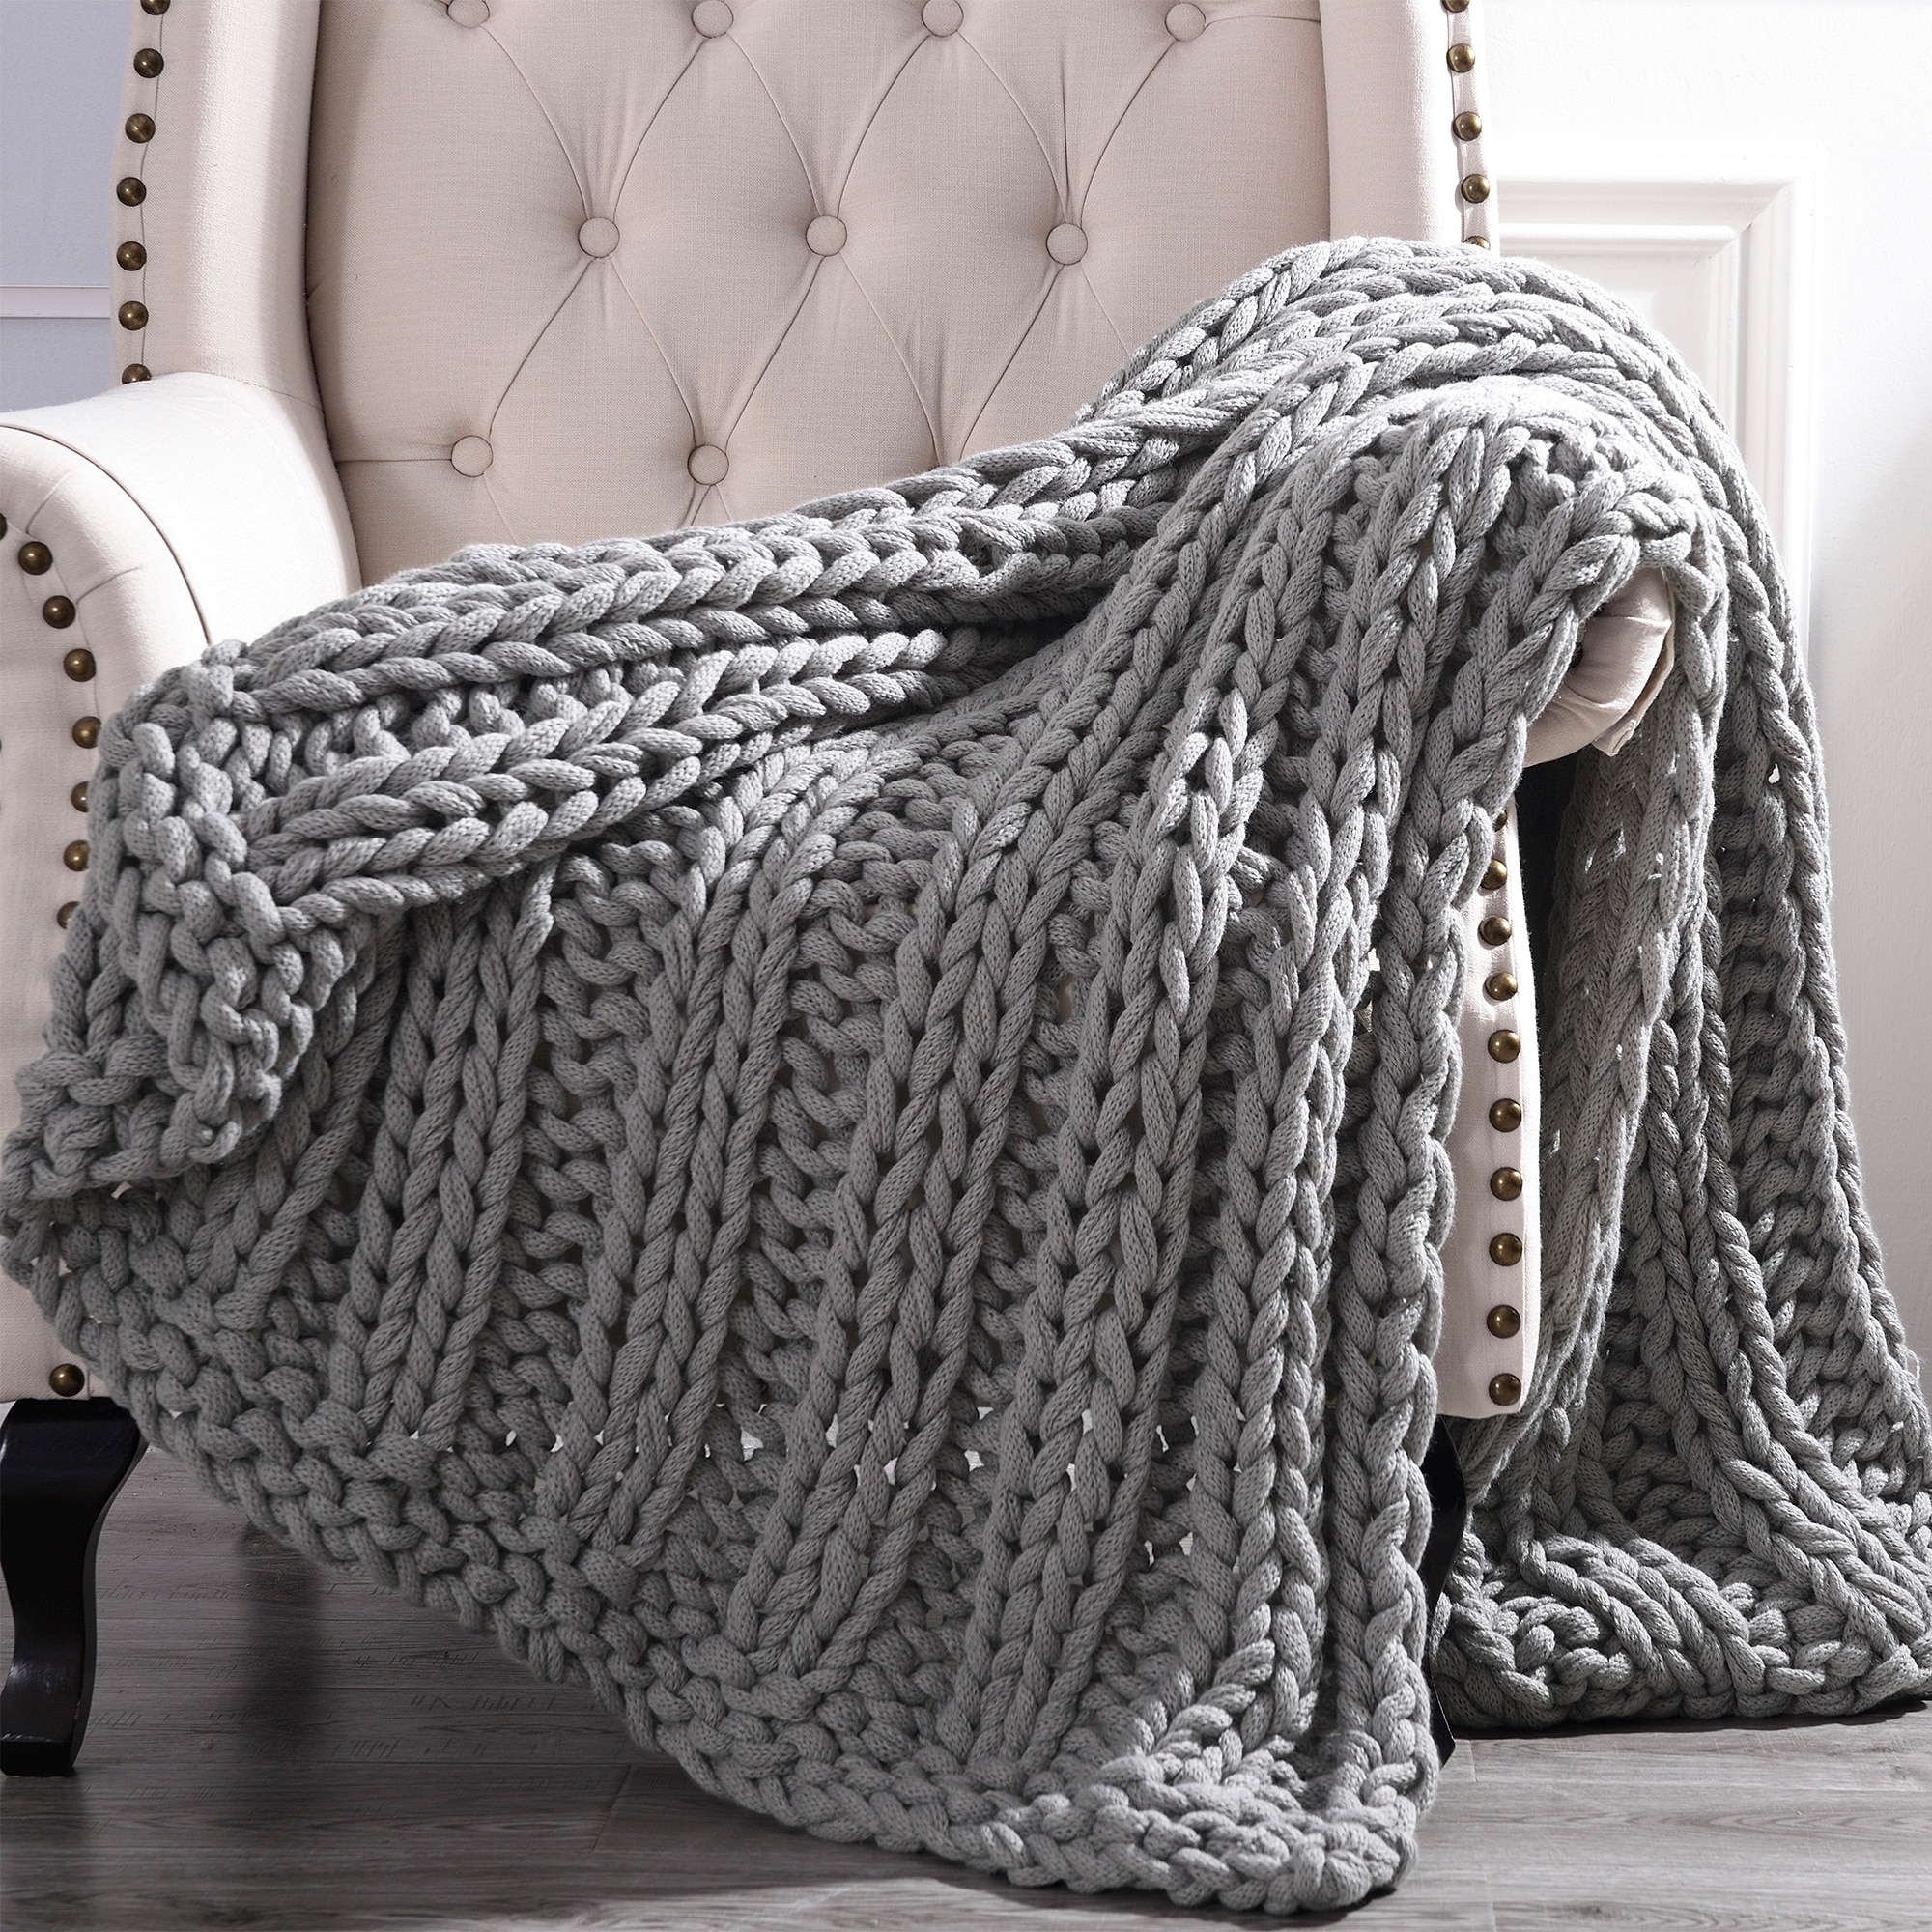 Chunky Knit Throws by Donna Sharp - Luxurious Acrylic Blankets for